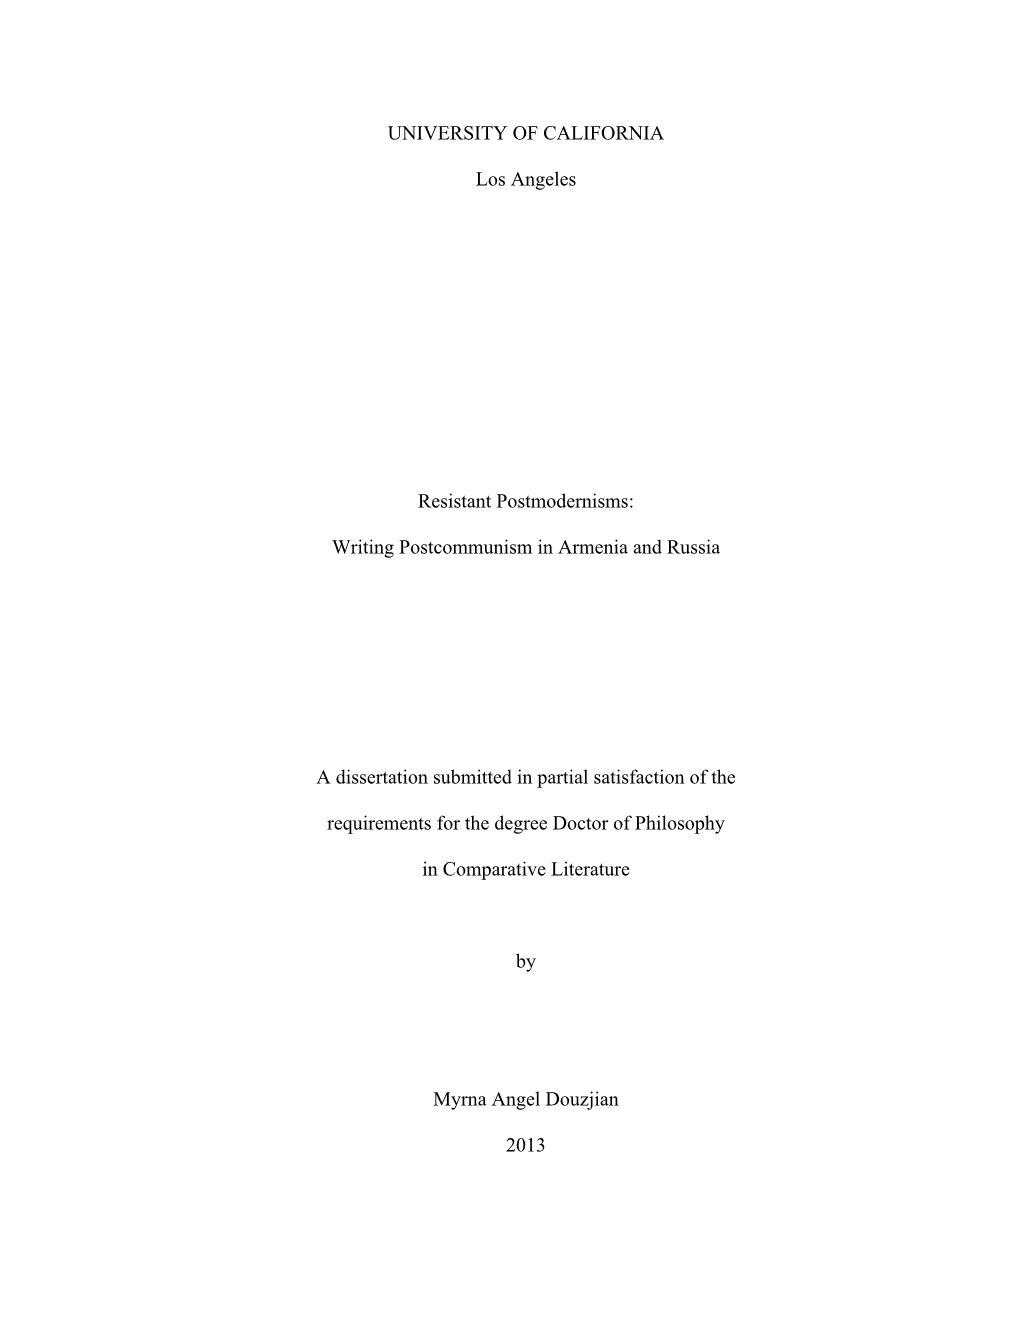 Writing Postcommunism in Armenia and Russia a Dissertation Submi